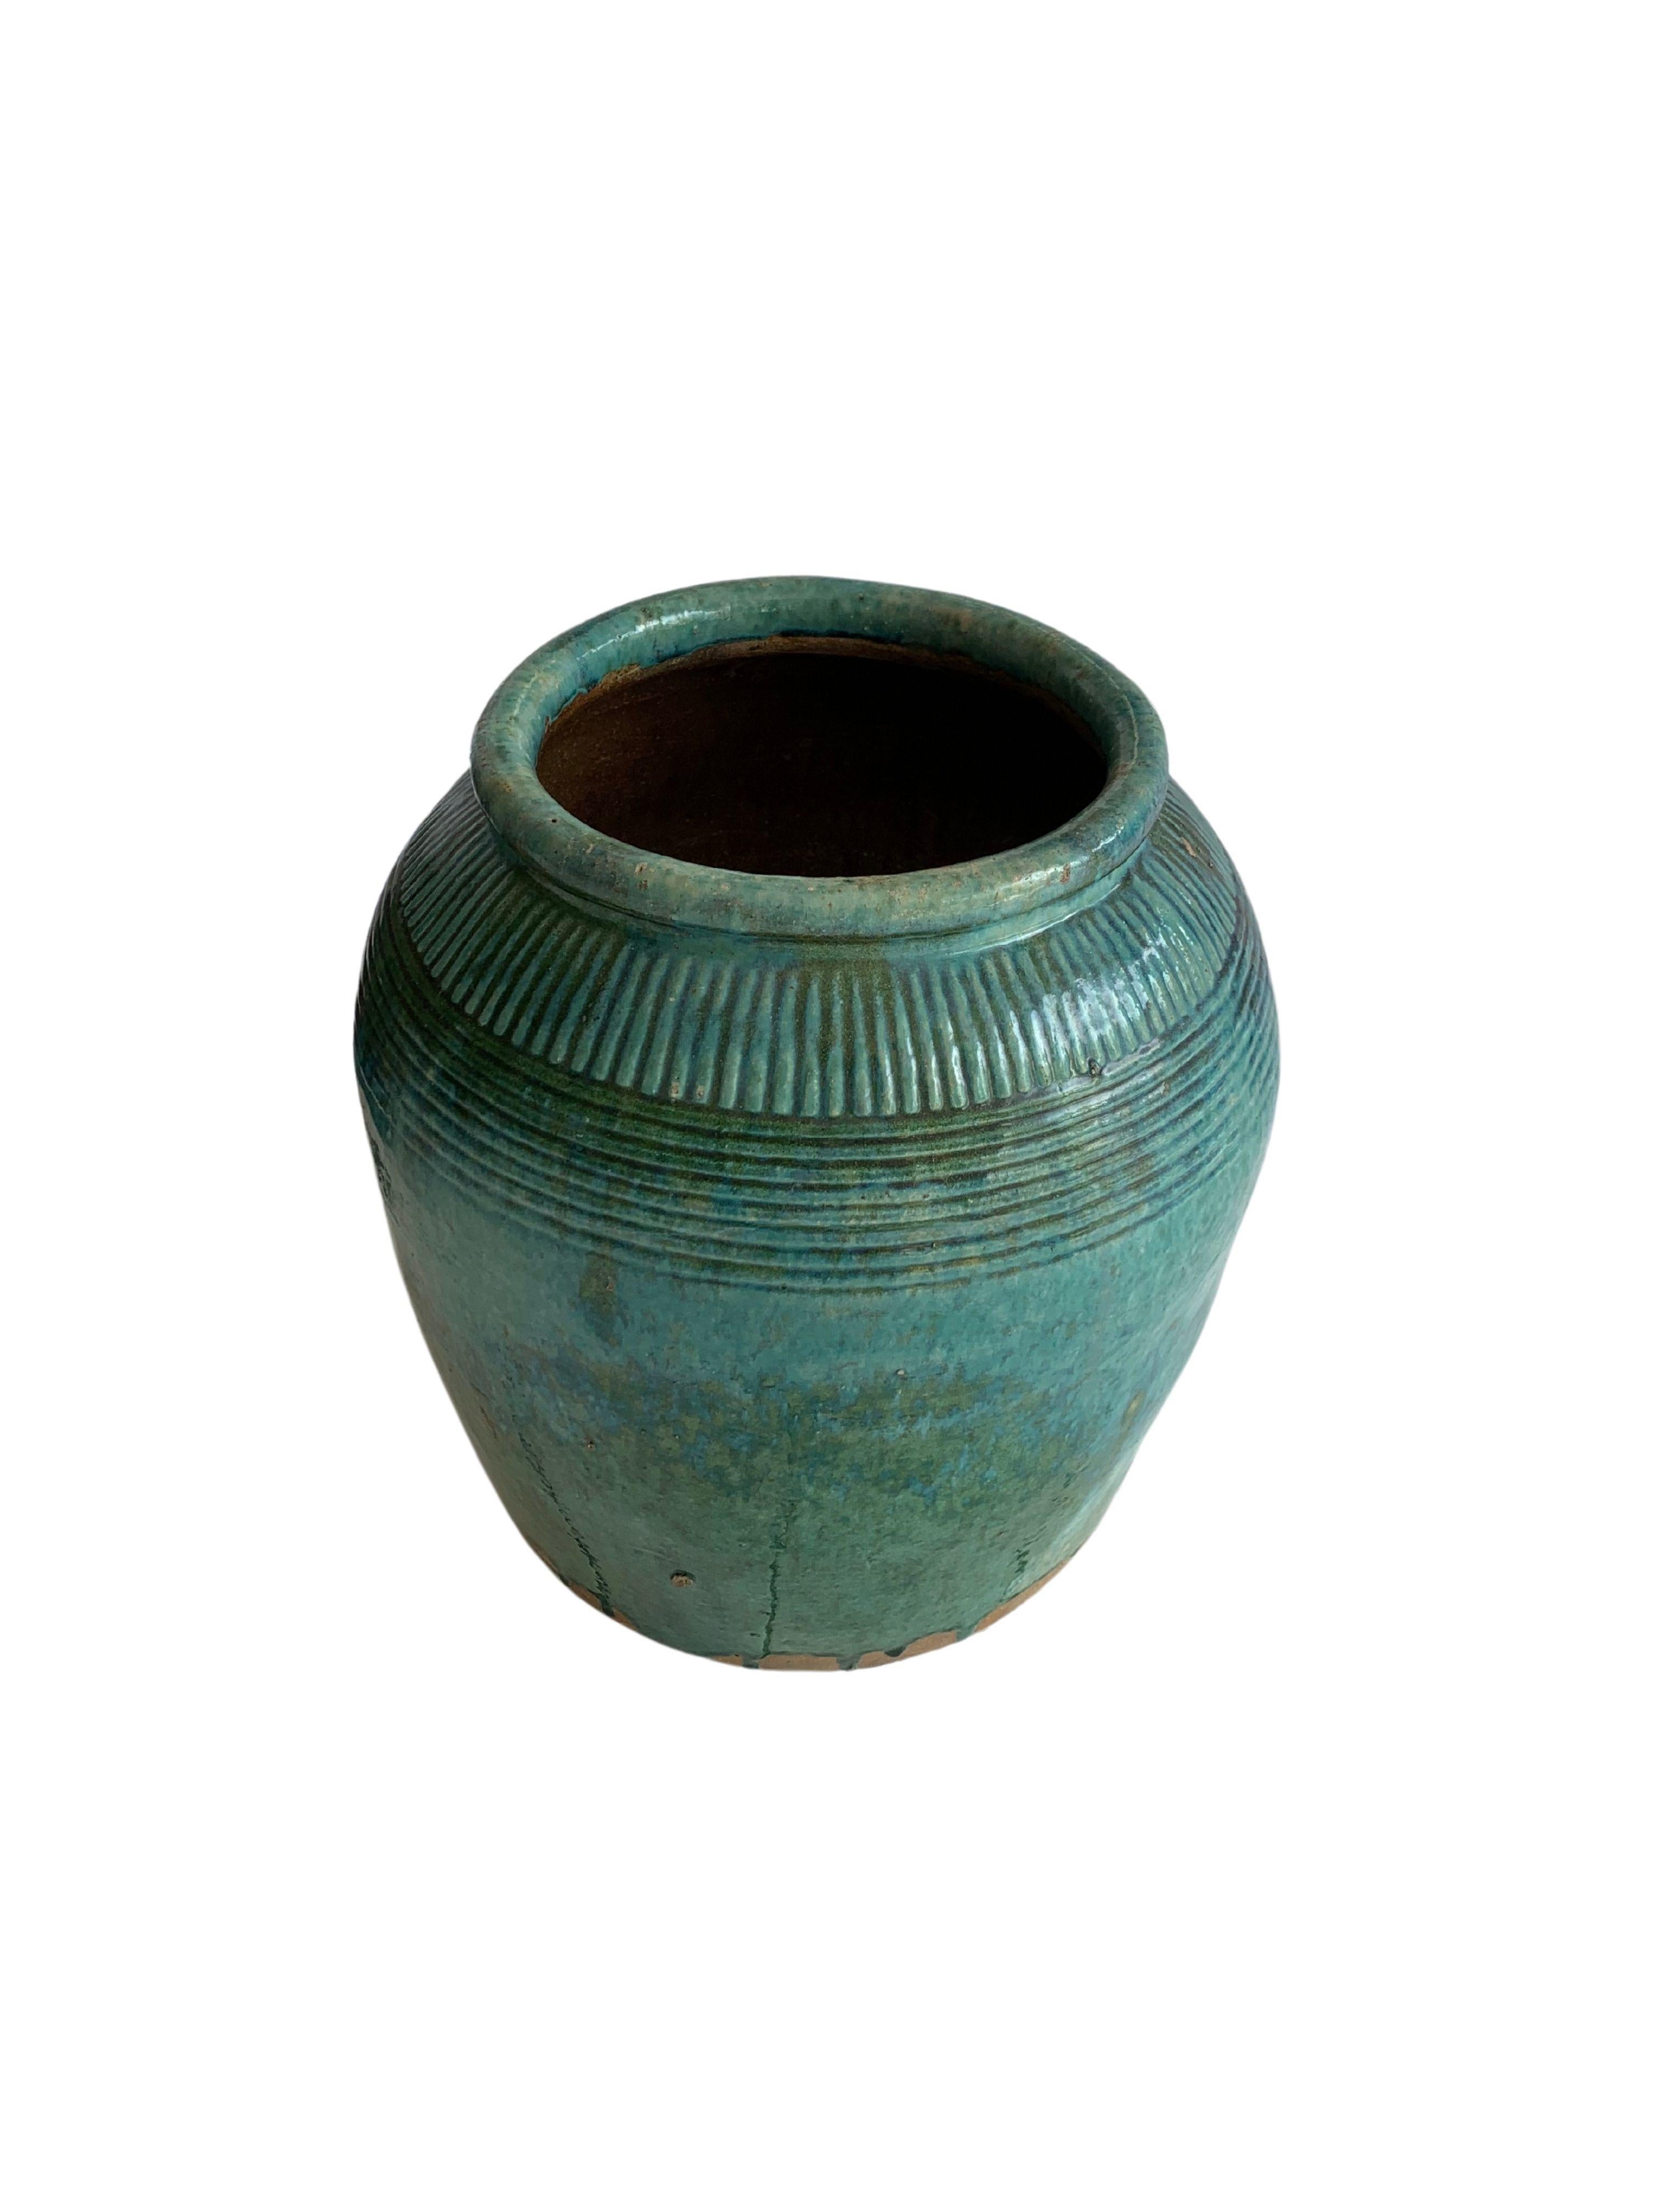 This glazed Chinese ceramic jar from the turn of the 19th Century was once used for soy sauce production. It features a wonderful green glazed (with hints of turquoise) finish and outer surface that features a ribbed texture. A great example of